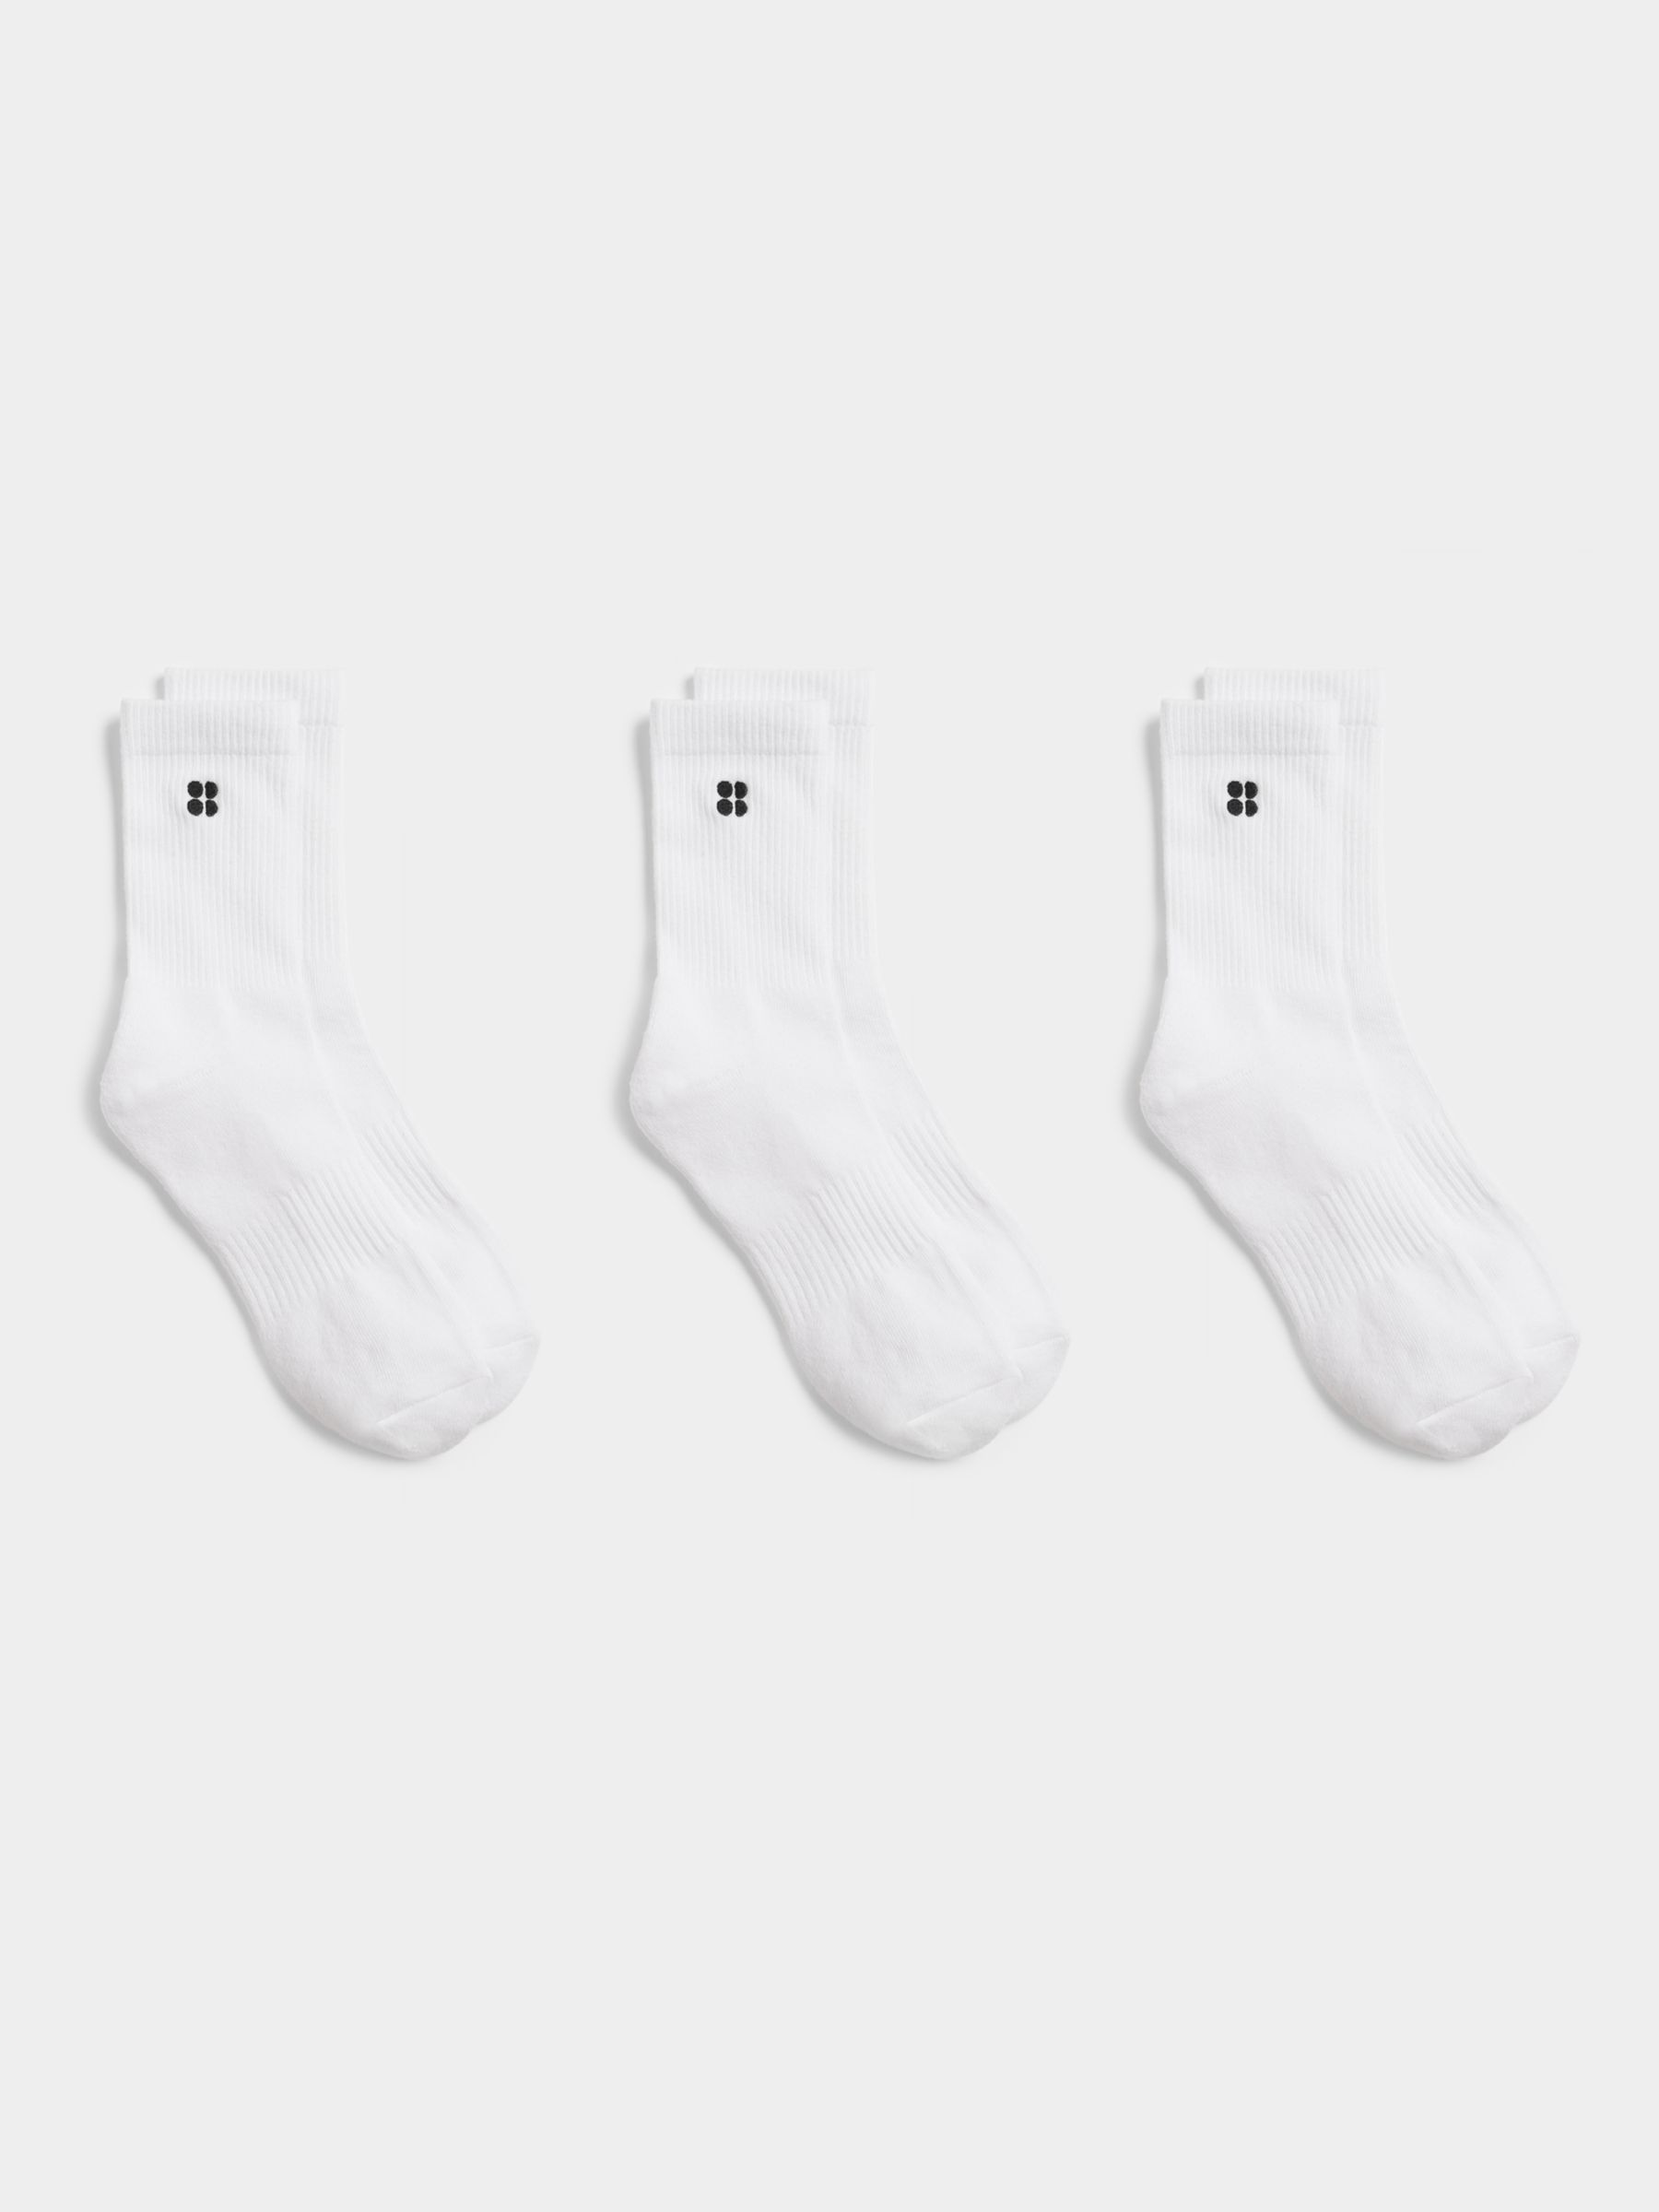 Sweaty Betty Organic Cotton Blend Essential Ankle Socks, Pack of 3, White, 2.5-5